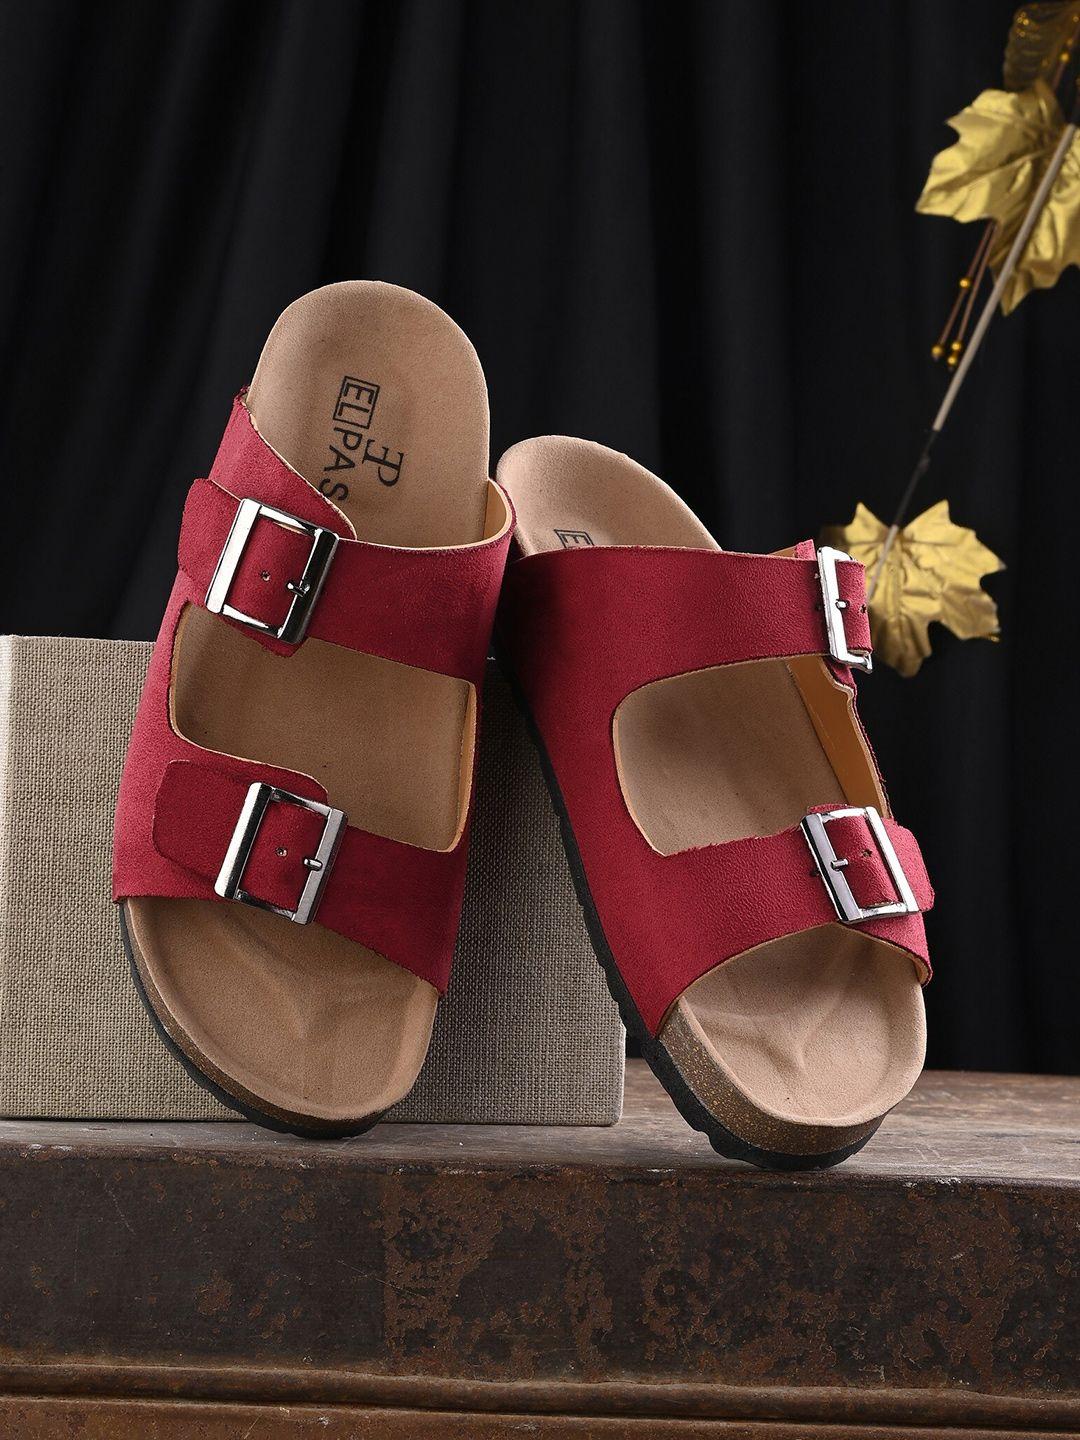 el paso women two straps open toe flats with buckle detail